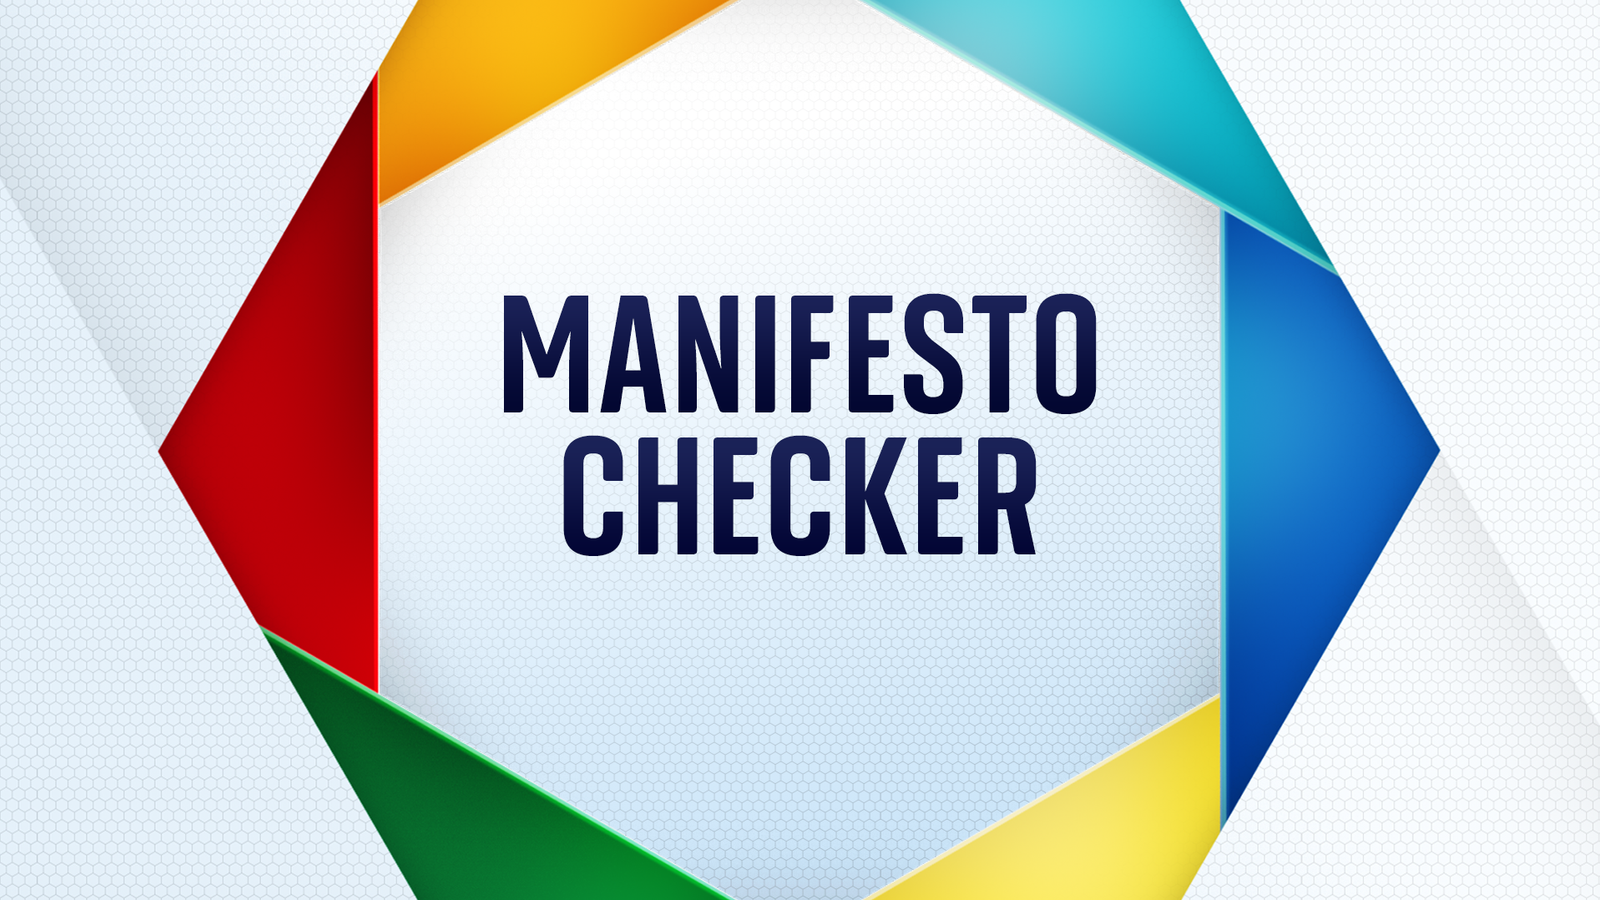 Manifesto checker: What are the Labour, Conservatives', Reform UK's, Liberal Democrats', SNP's, Greens' and Plaid Cymru's key pledges?